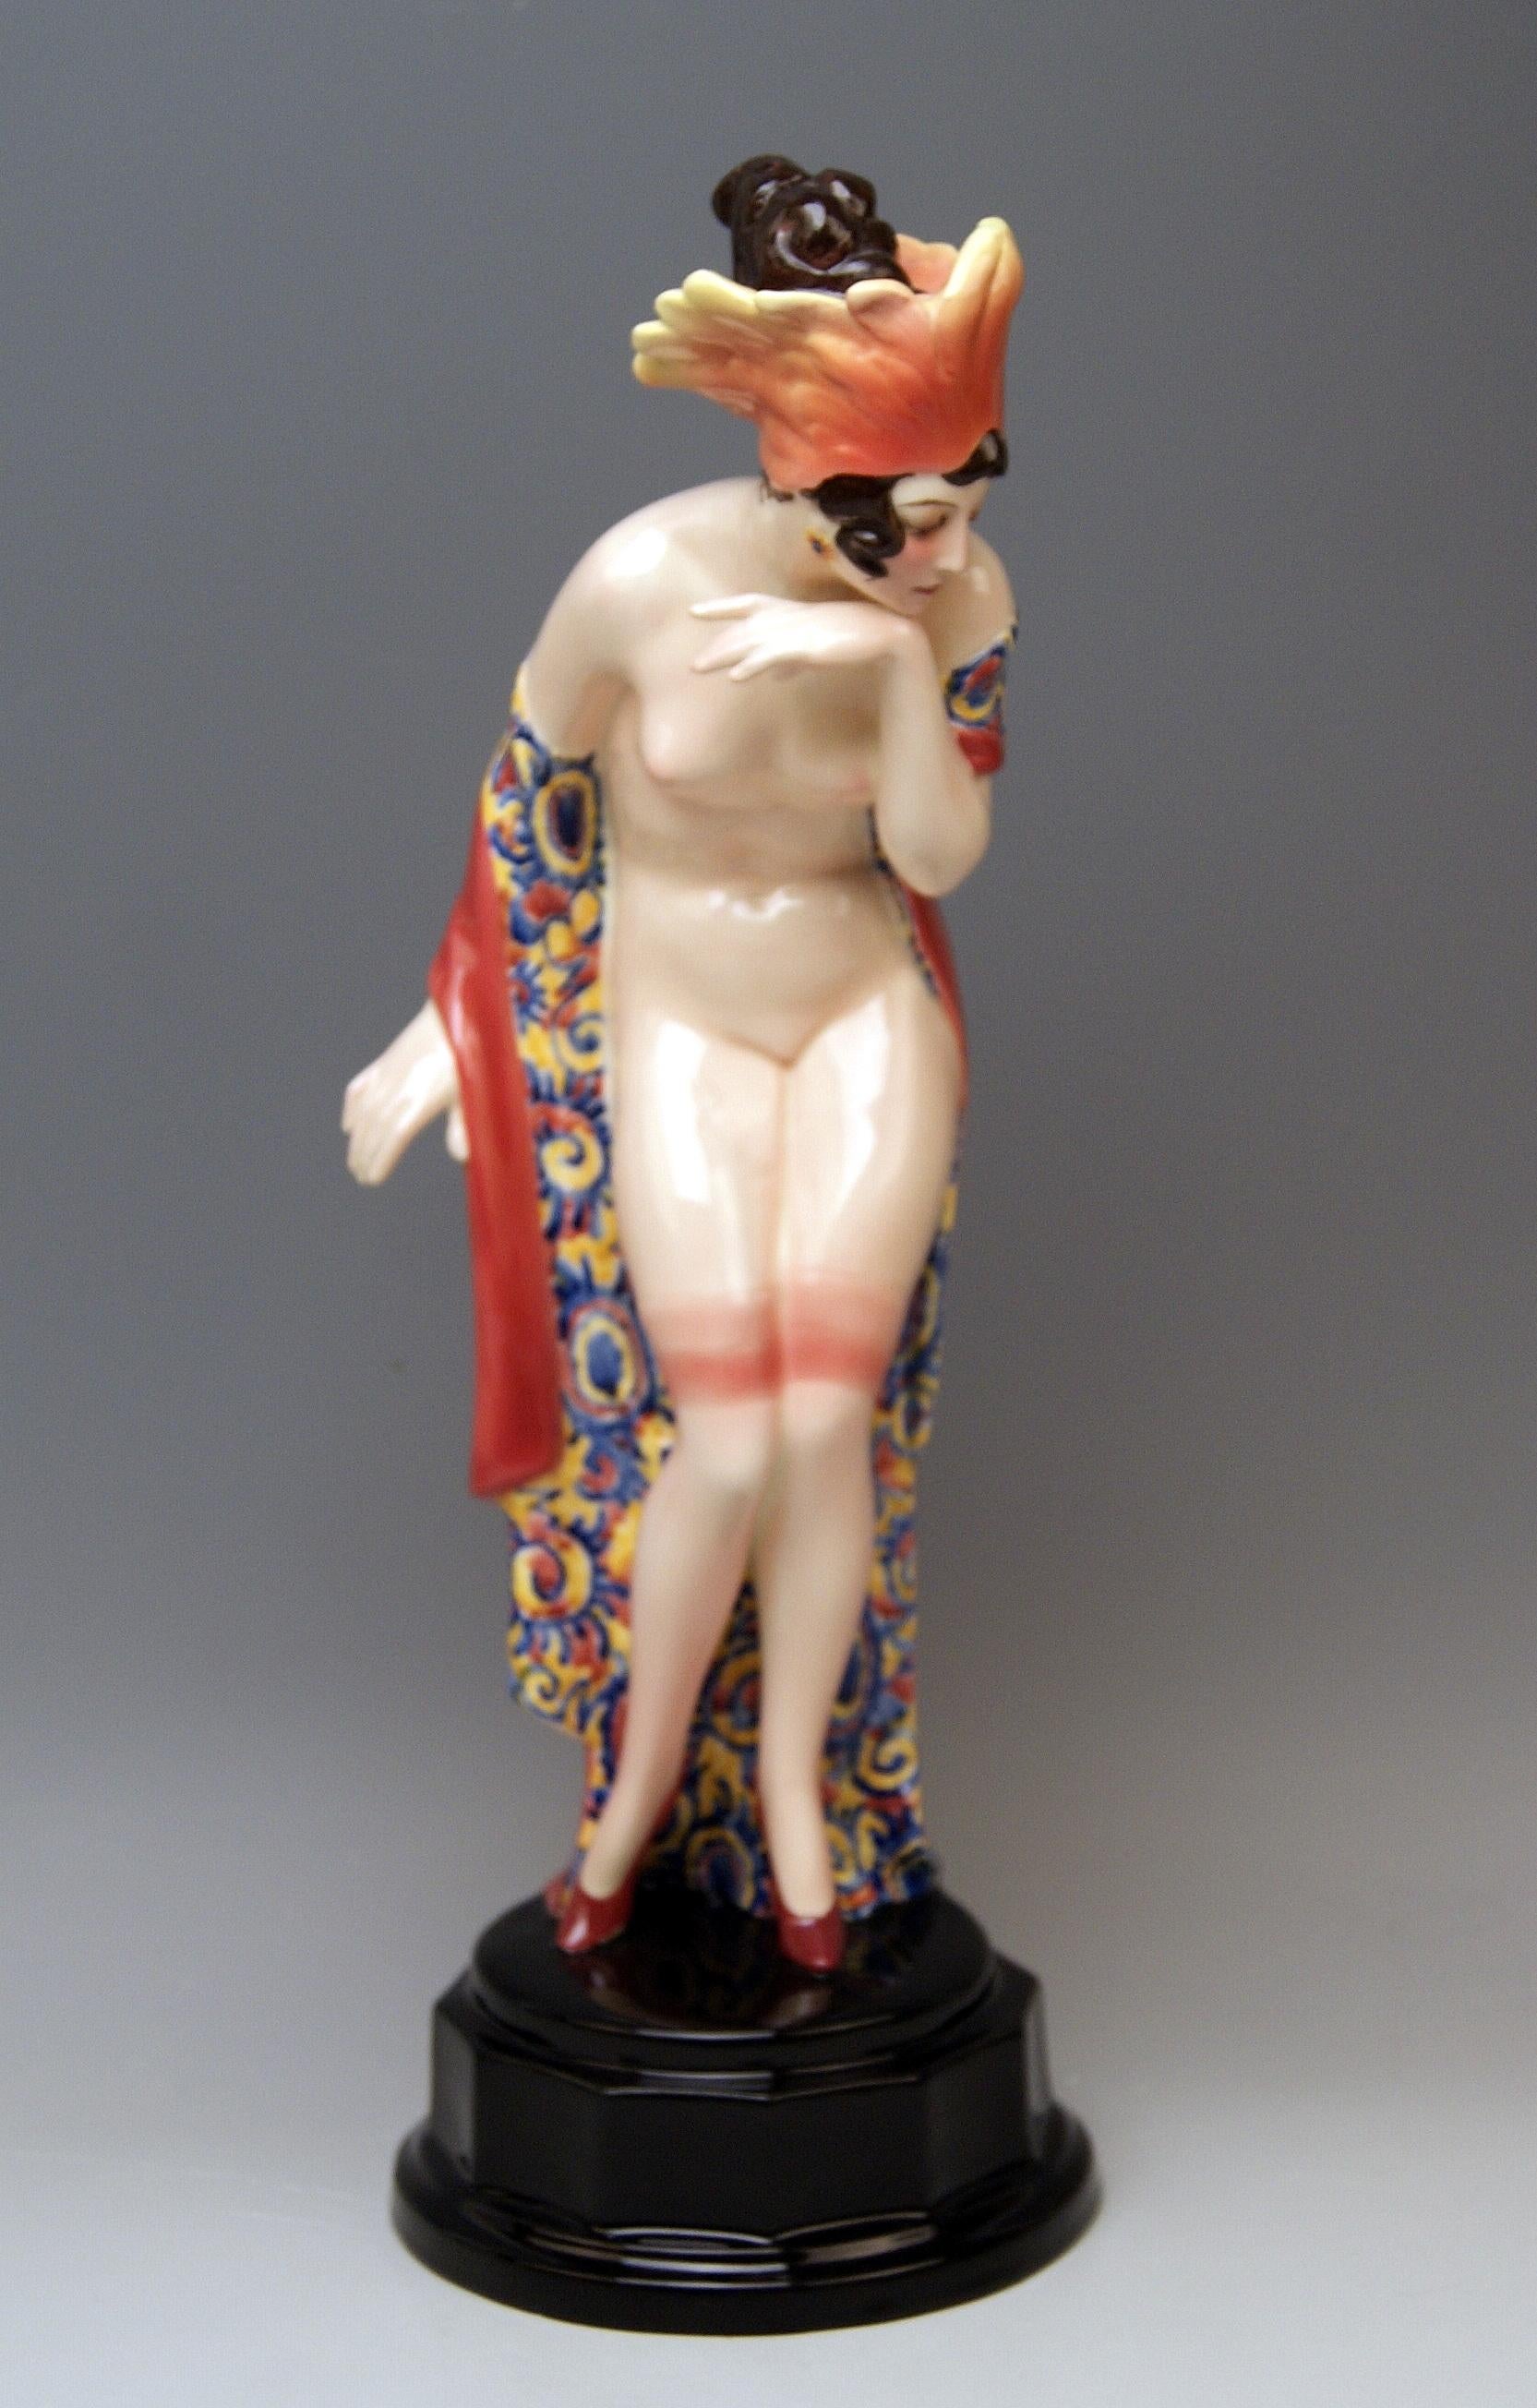 Goldscheider Vienna rarest lady nude figurine wearing feathered decoration - A very special type of cap - covering her head: It is called 'Fascination'.
Designed by Wilhelm Thomasch (1893-1964), model created, circa 1922 or made, circa